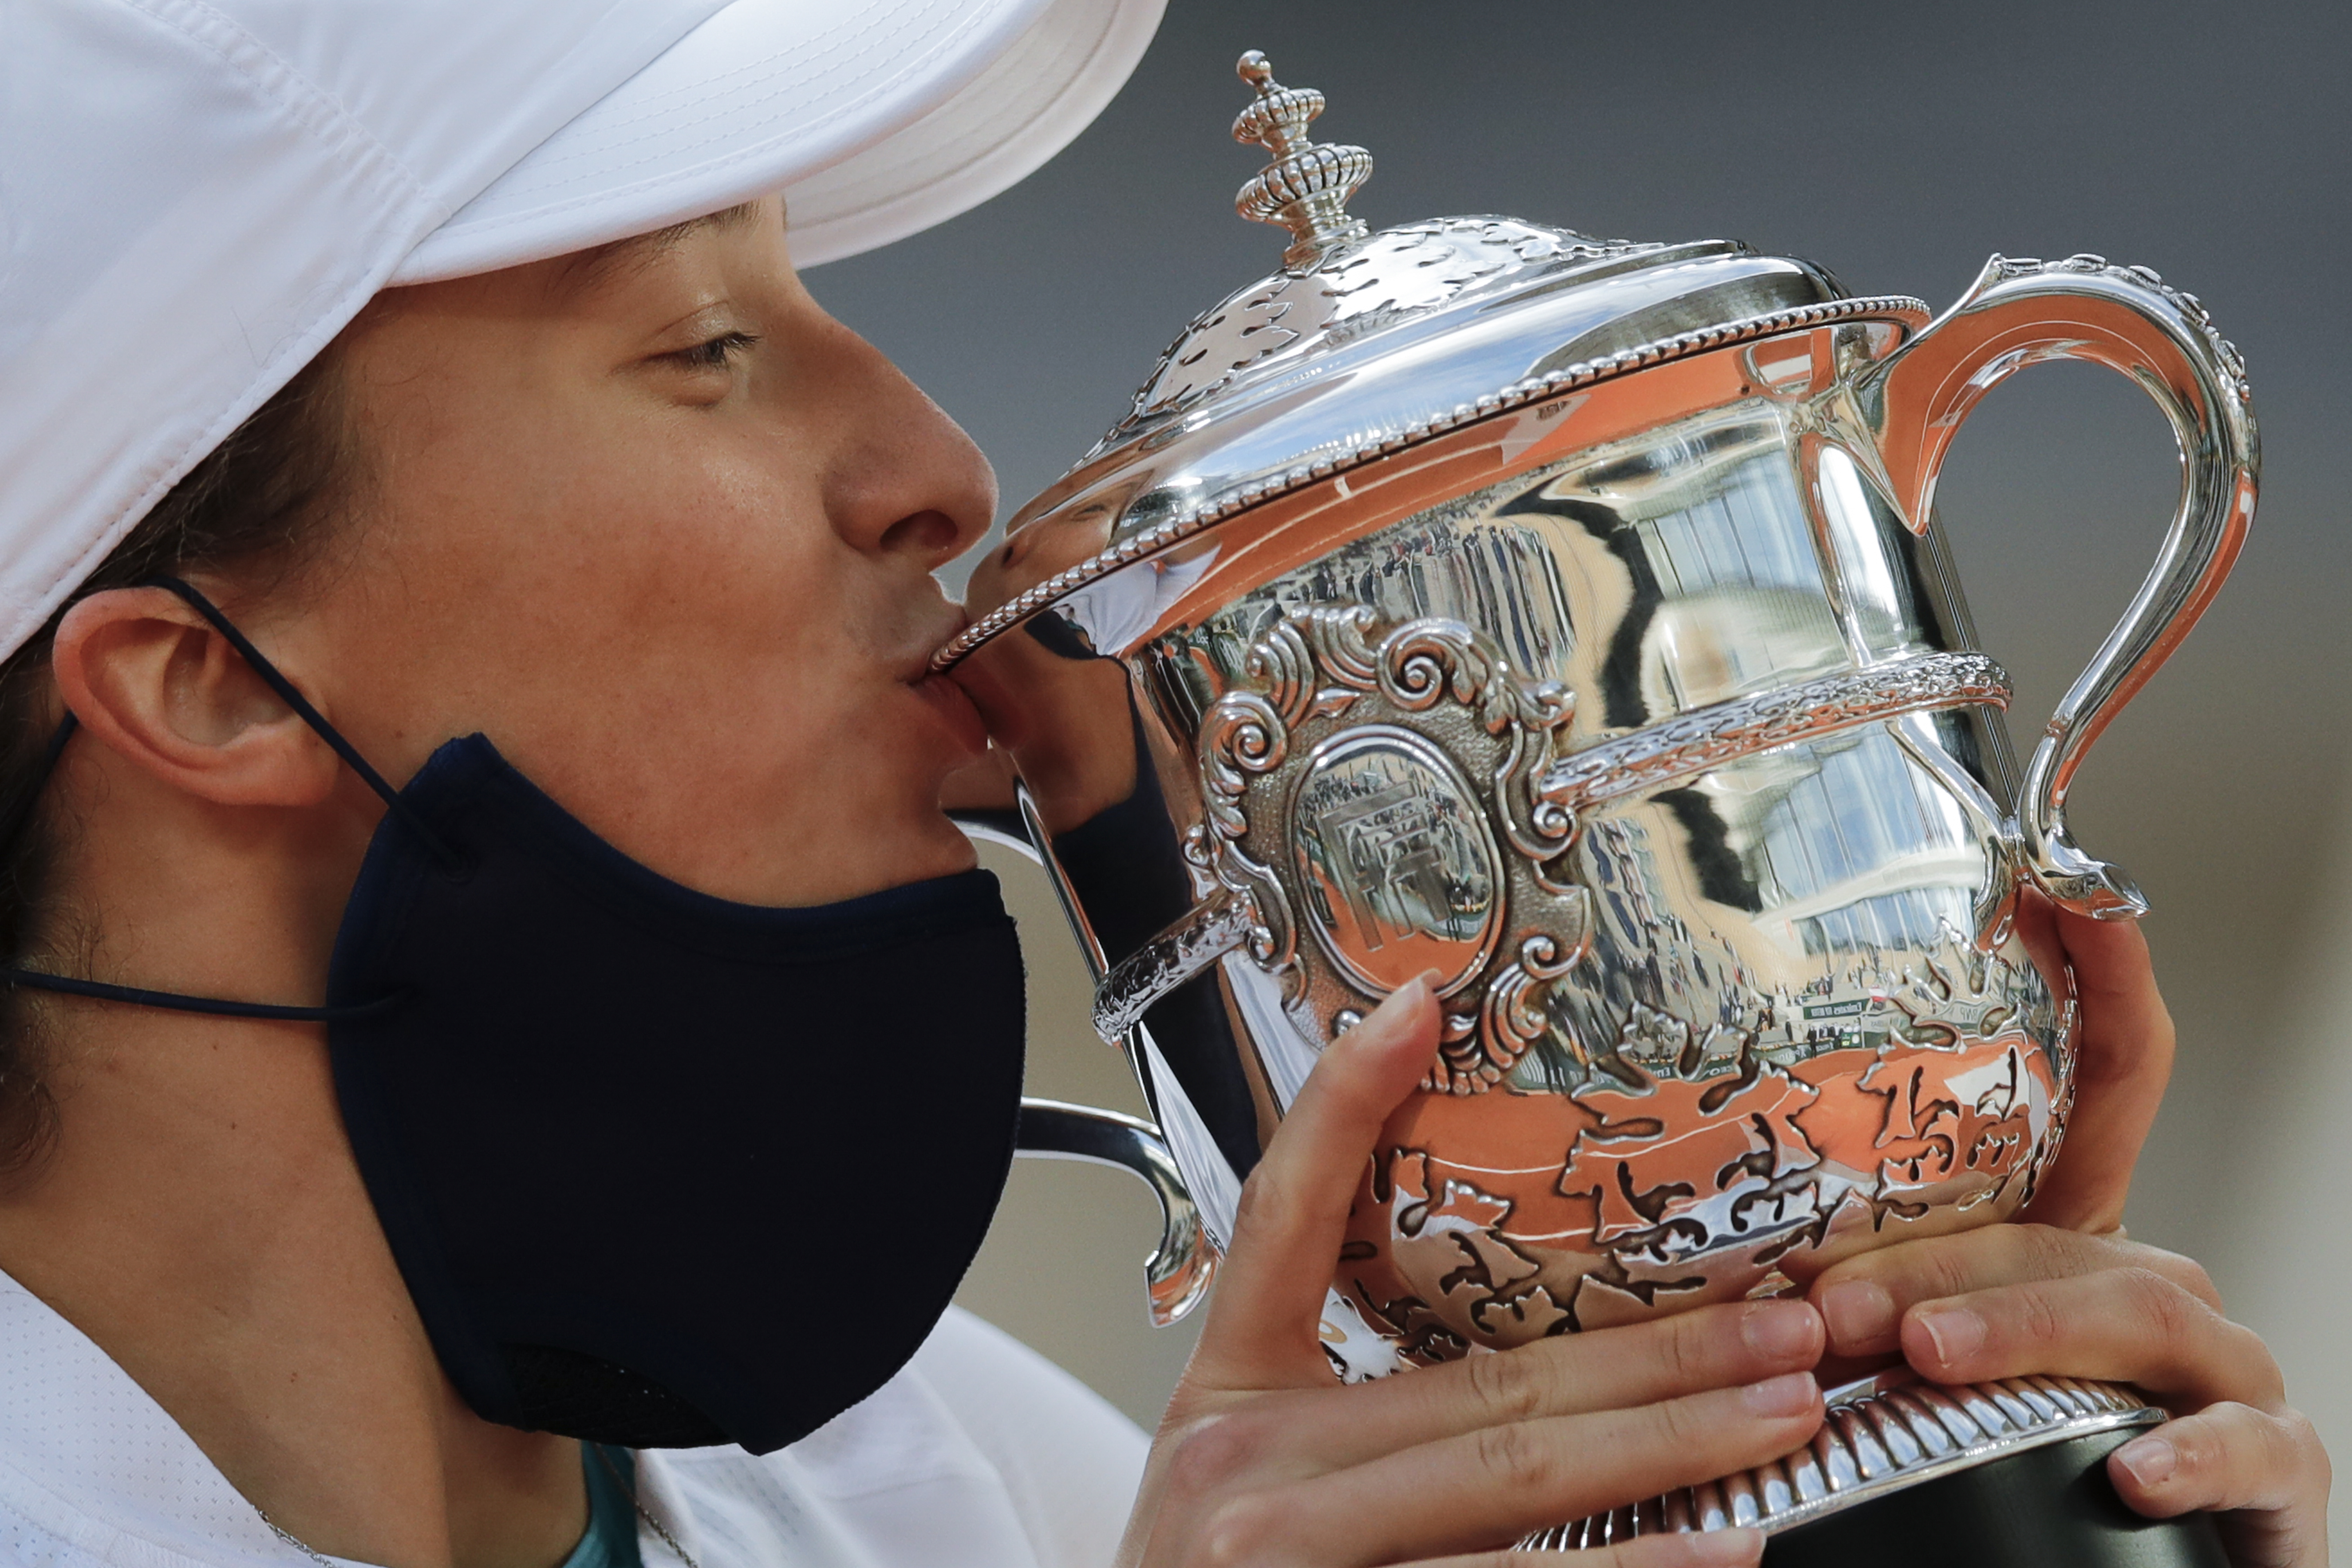 Poland's Iga Swiatek kisses the trophy after winning the final match of the French Open tennis tournament against Sofia Kenin of the U.S. in two sets 6-4, 6-1, at the Roland Garros stadium in Paris, France, Saturday, Oct. 10, 2020. Photo: AP